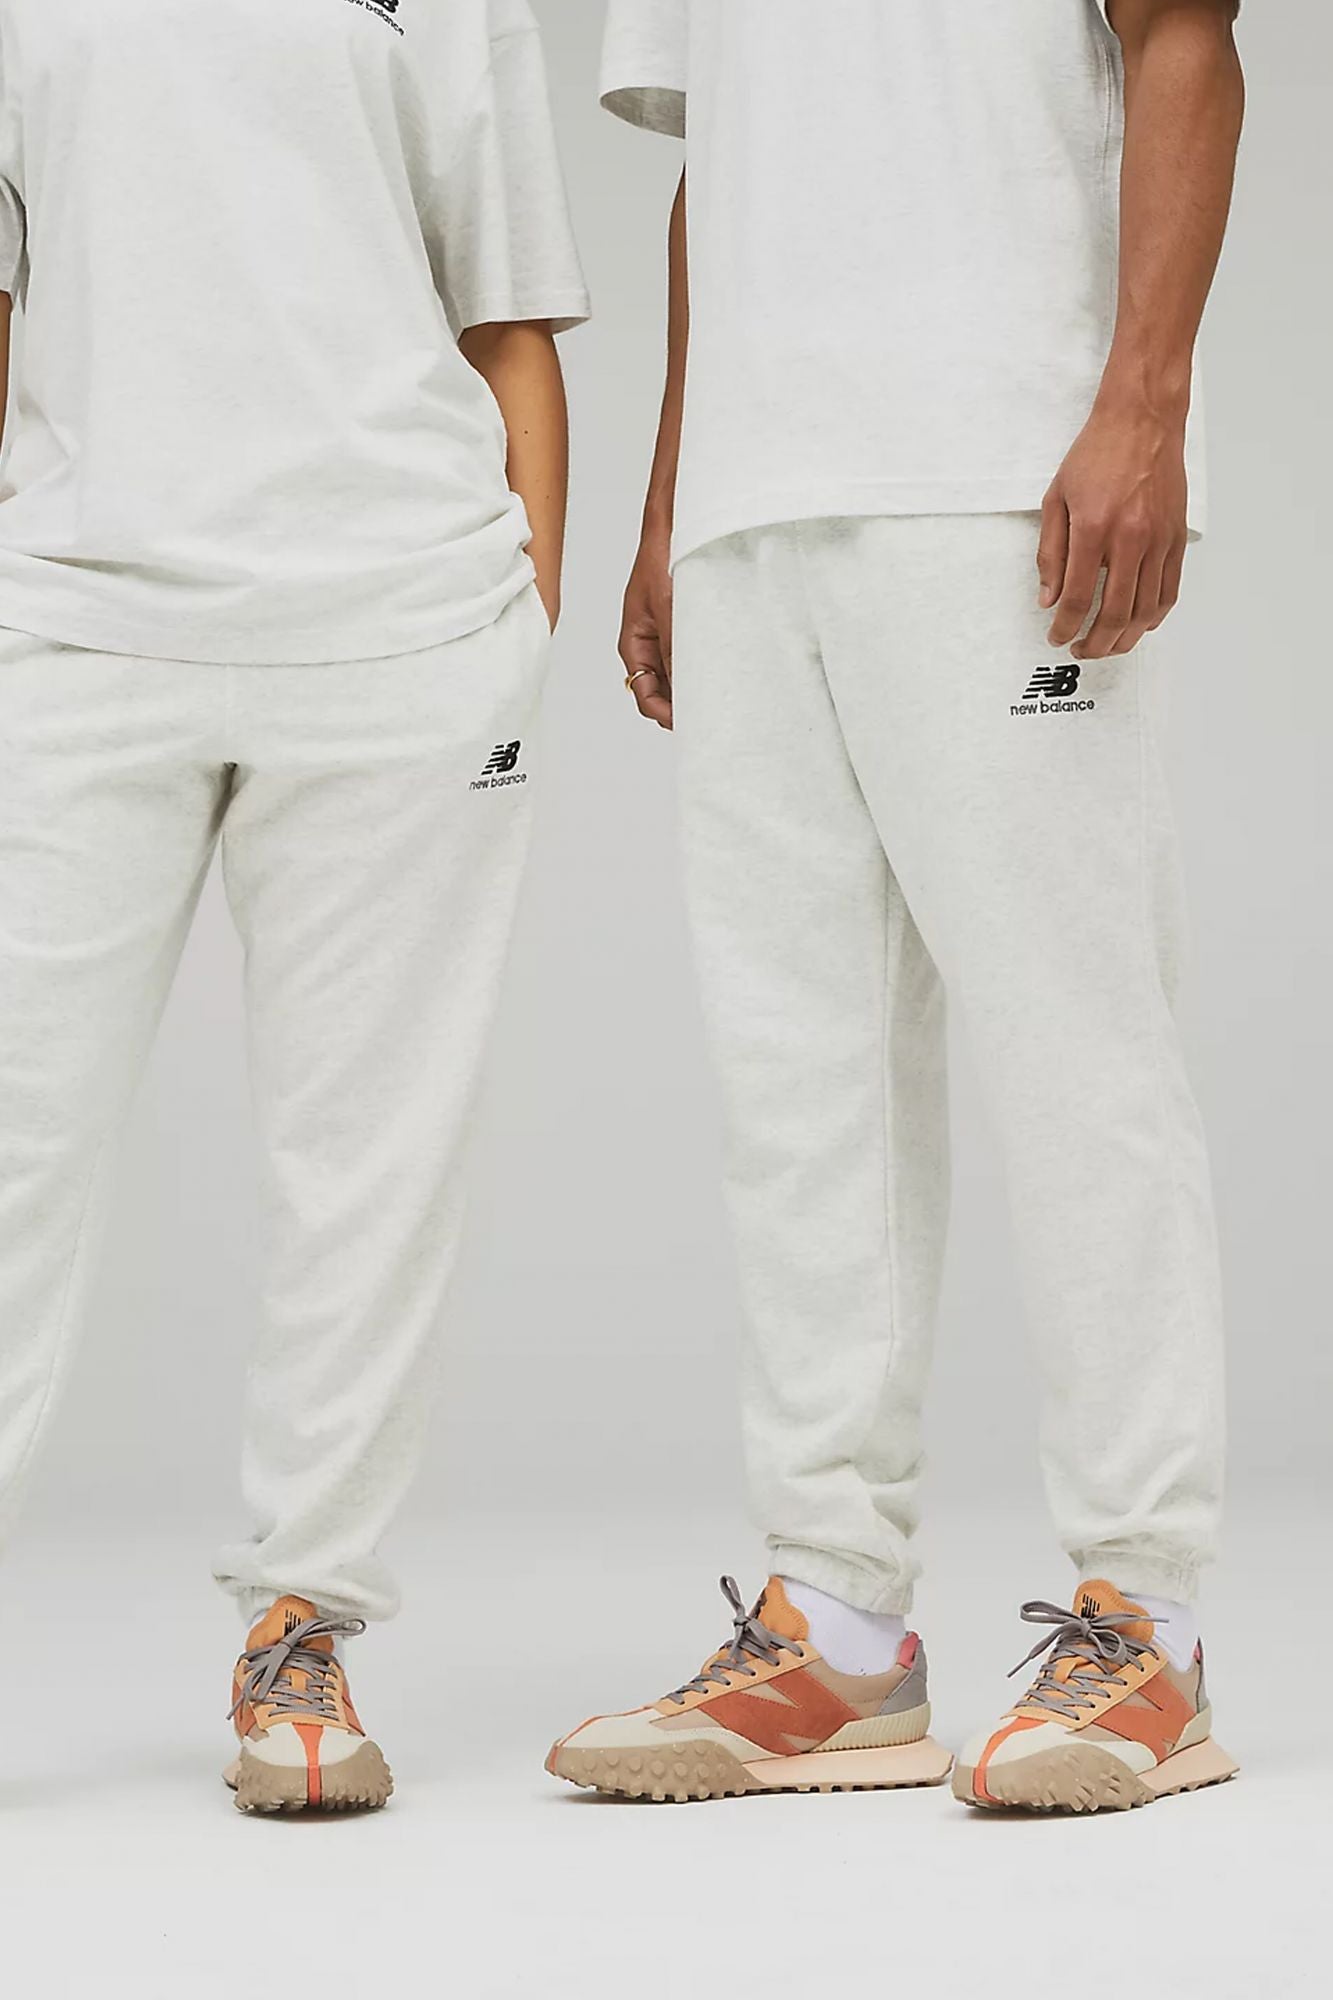 NEW BALANCE UNI-SSENTIALS FRENCH TERRY SWEATPANT en color BLANCO (4)